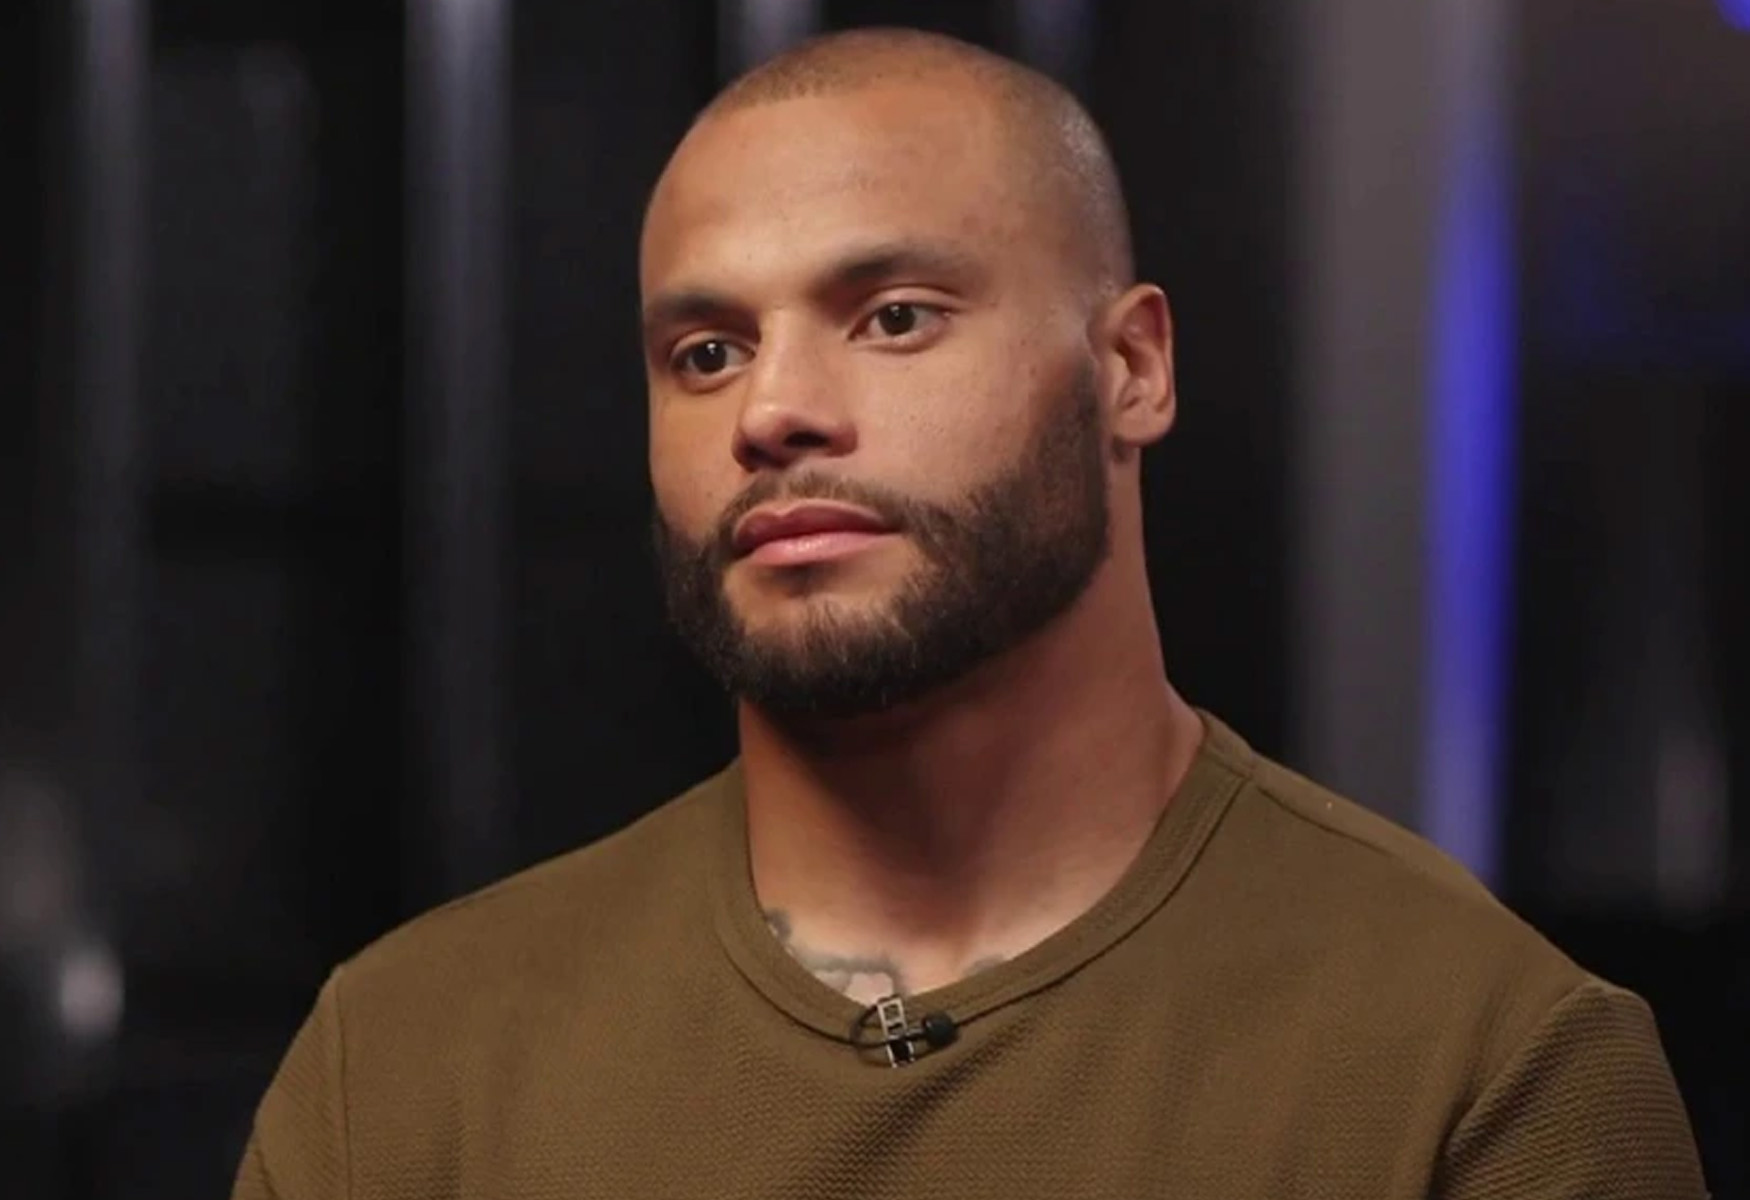 New Campaign By Dak Prescott Raises Colorectal Cancer Awareness With A Dash Of Humor